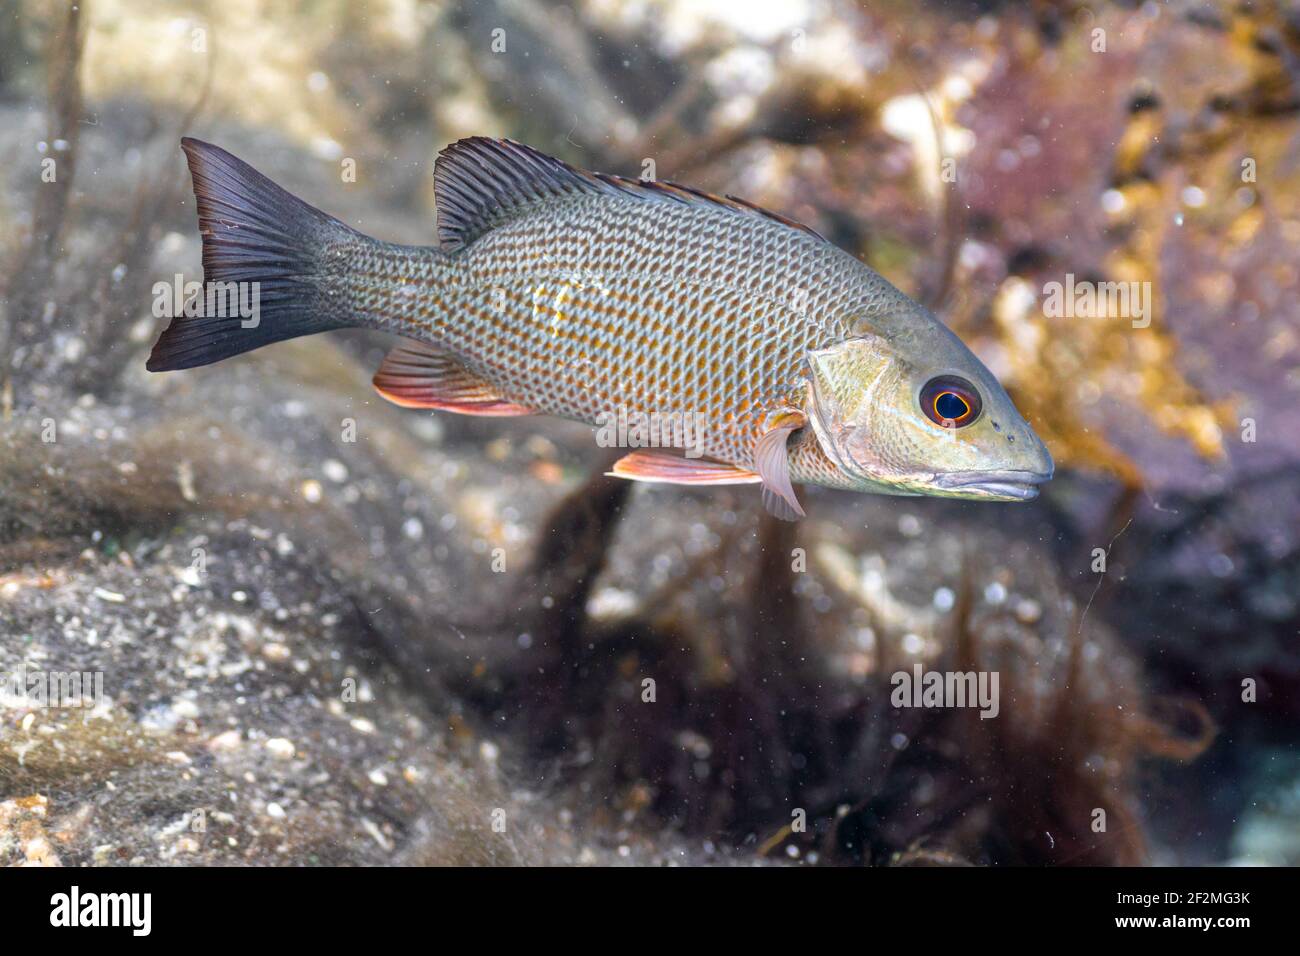 Close-up of a beautiful Mangrove Snapper displaying its subtle yet colorful markings. Stock Photo